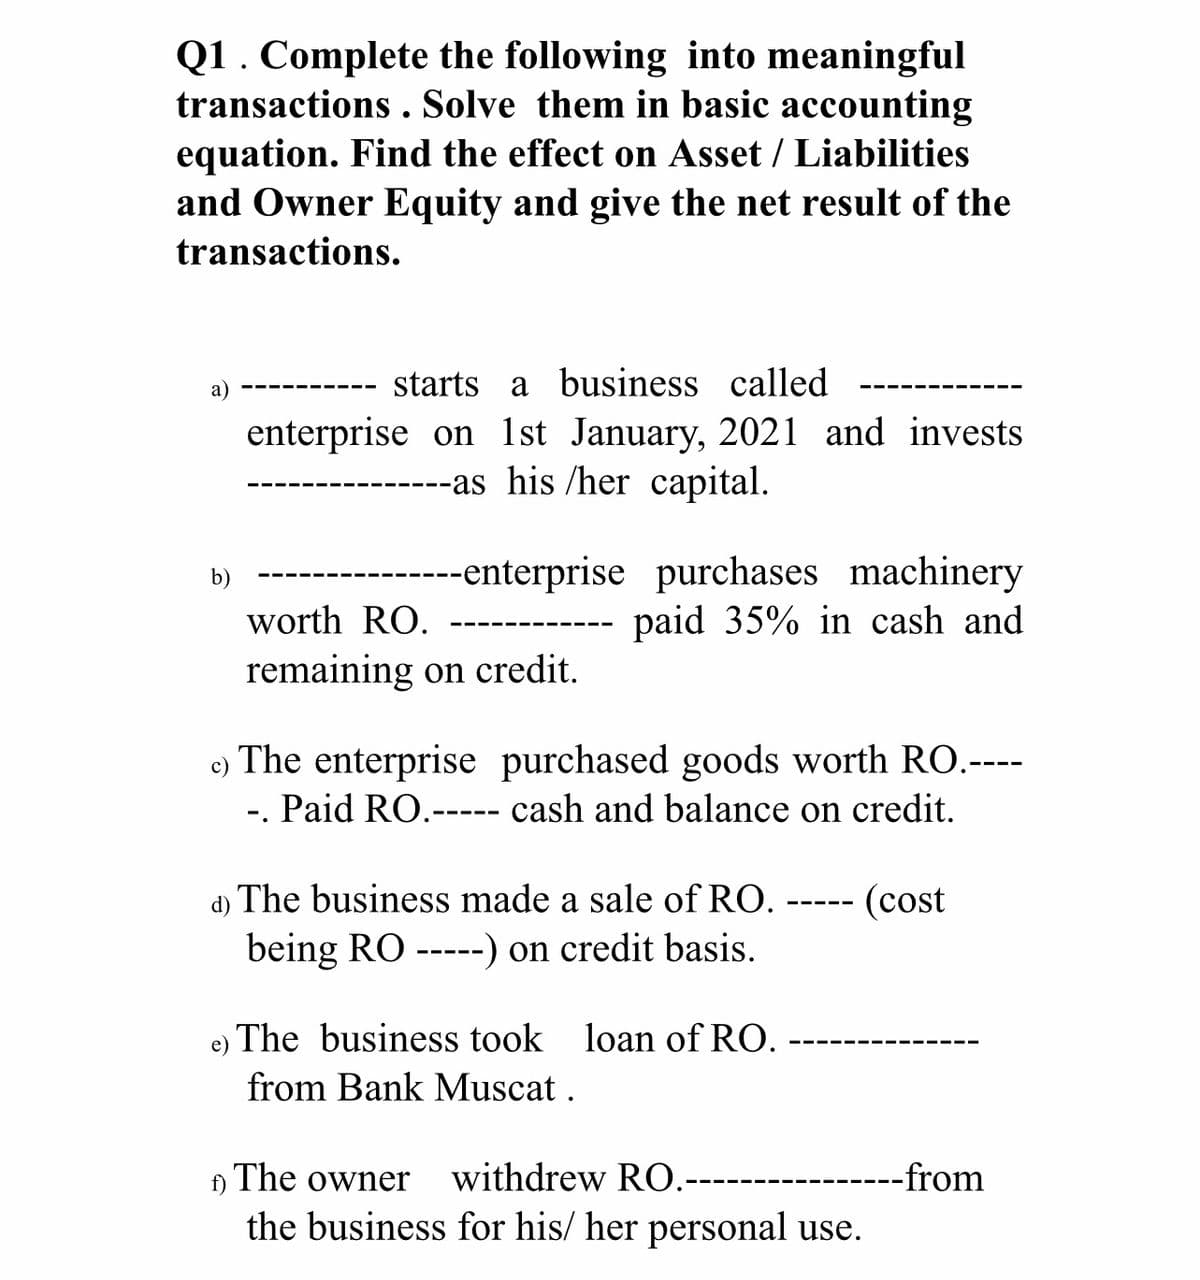 Q1. Complete the following into meaningful
transactions . Solve them in basic accounting
equation. Find the effect on Asset / Liabilities
and Owner Equity and give the net result of the
transactions.
а)
starts a business
called
enterprise on 1st January, 2021 and invests
----as his /her capital.
----enterprise purchases machinery
paid 35% in cash and
b)
worth RO.
remaining on credit.
c) The enterprise purchased goods worth RO.----
-. Paid RO.----- cash and balance on credit.
d) The business made a sale of RO.
(cost
being RO ----) on credit basis.
e)
The business took loan of RO.
from Bank Muscat .
f)
The owner
withdrew RO.-----
----from
the business for his/ her personal use.
